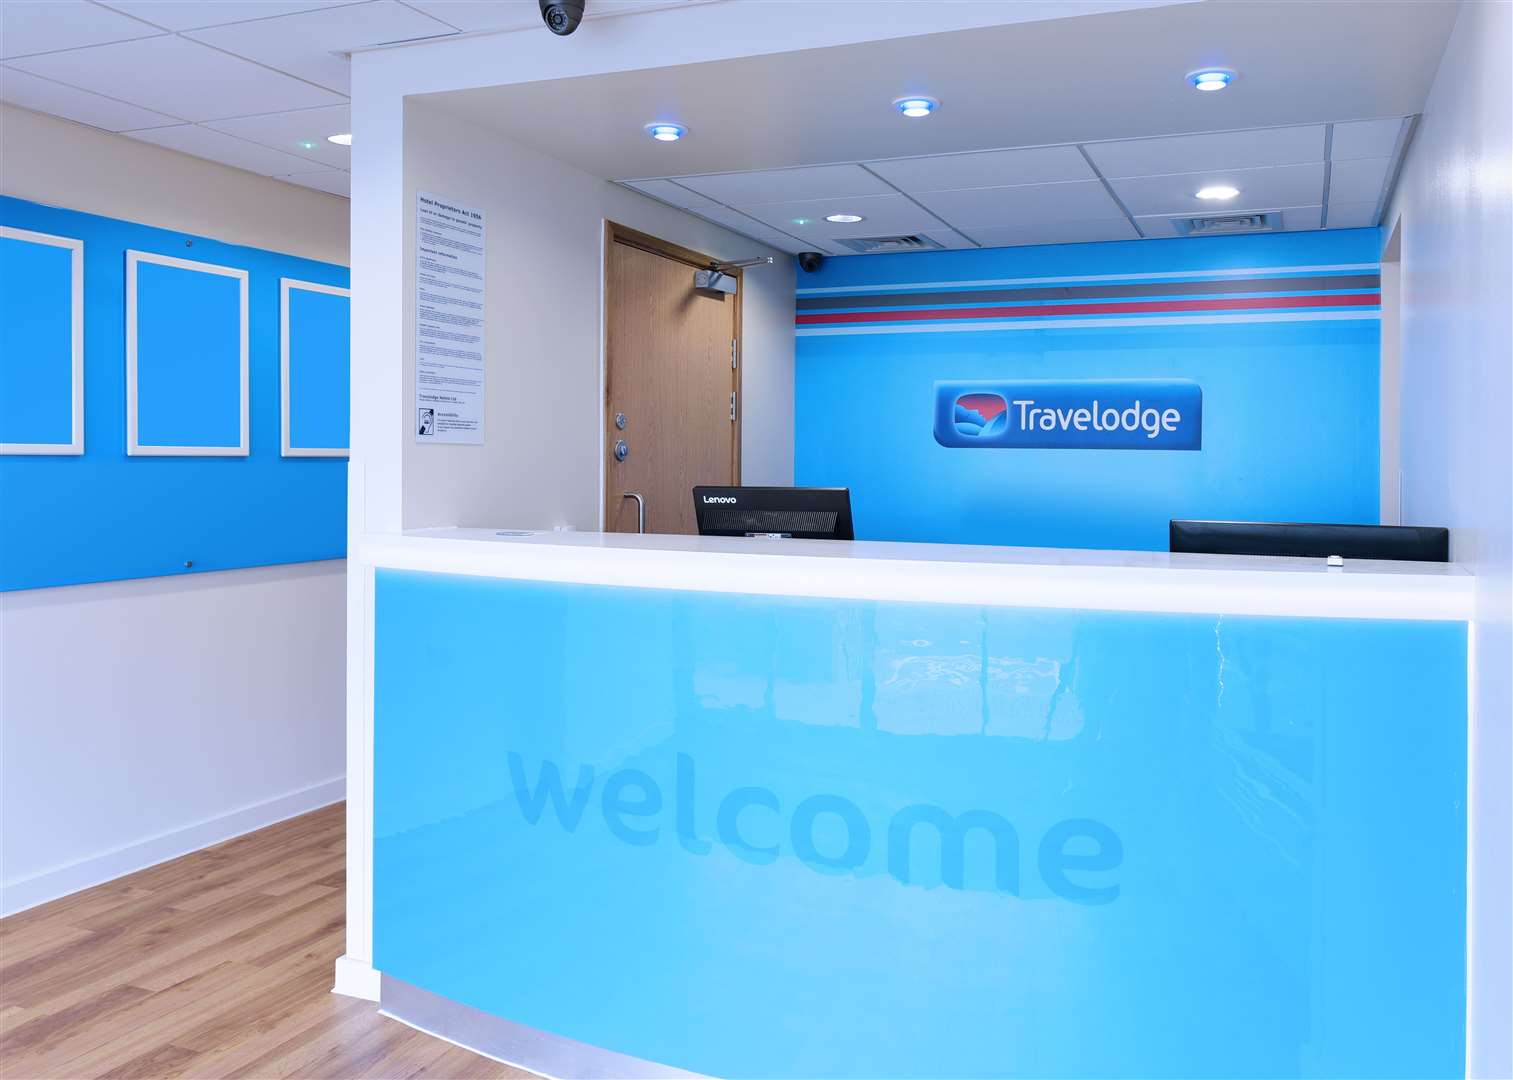 It is hoped the new Travelodge at Discovery Park, Sandwich will attract tourists